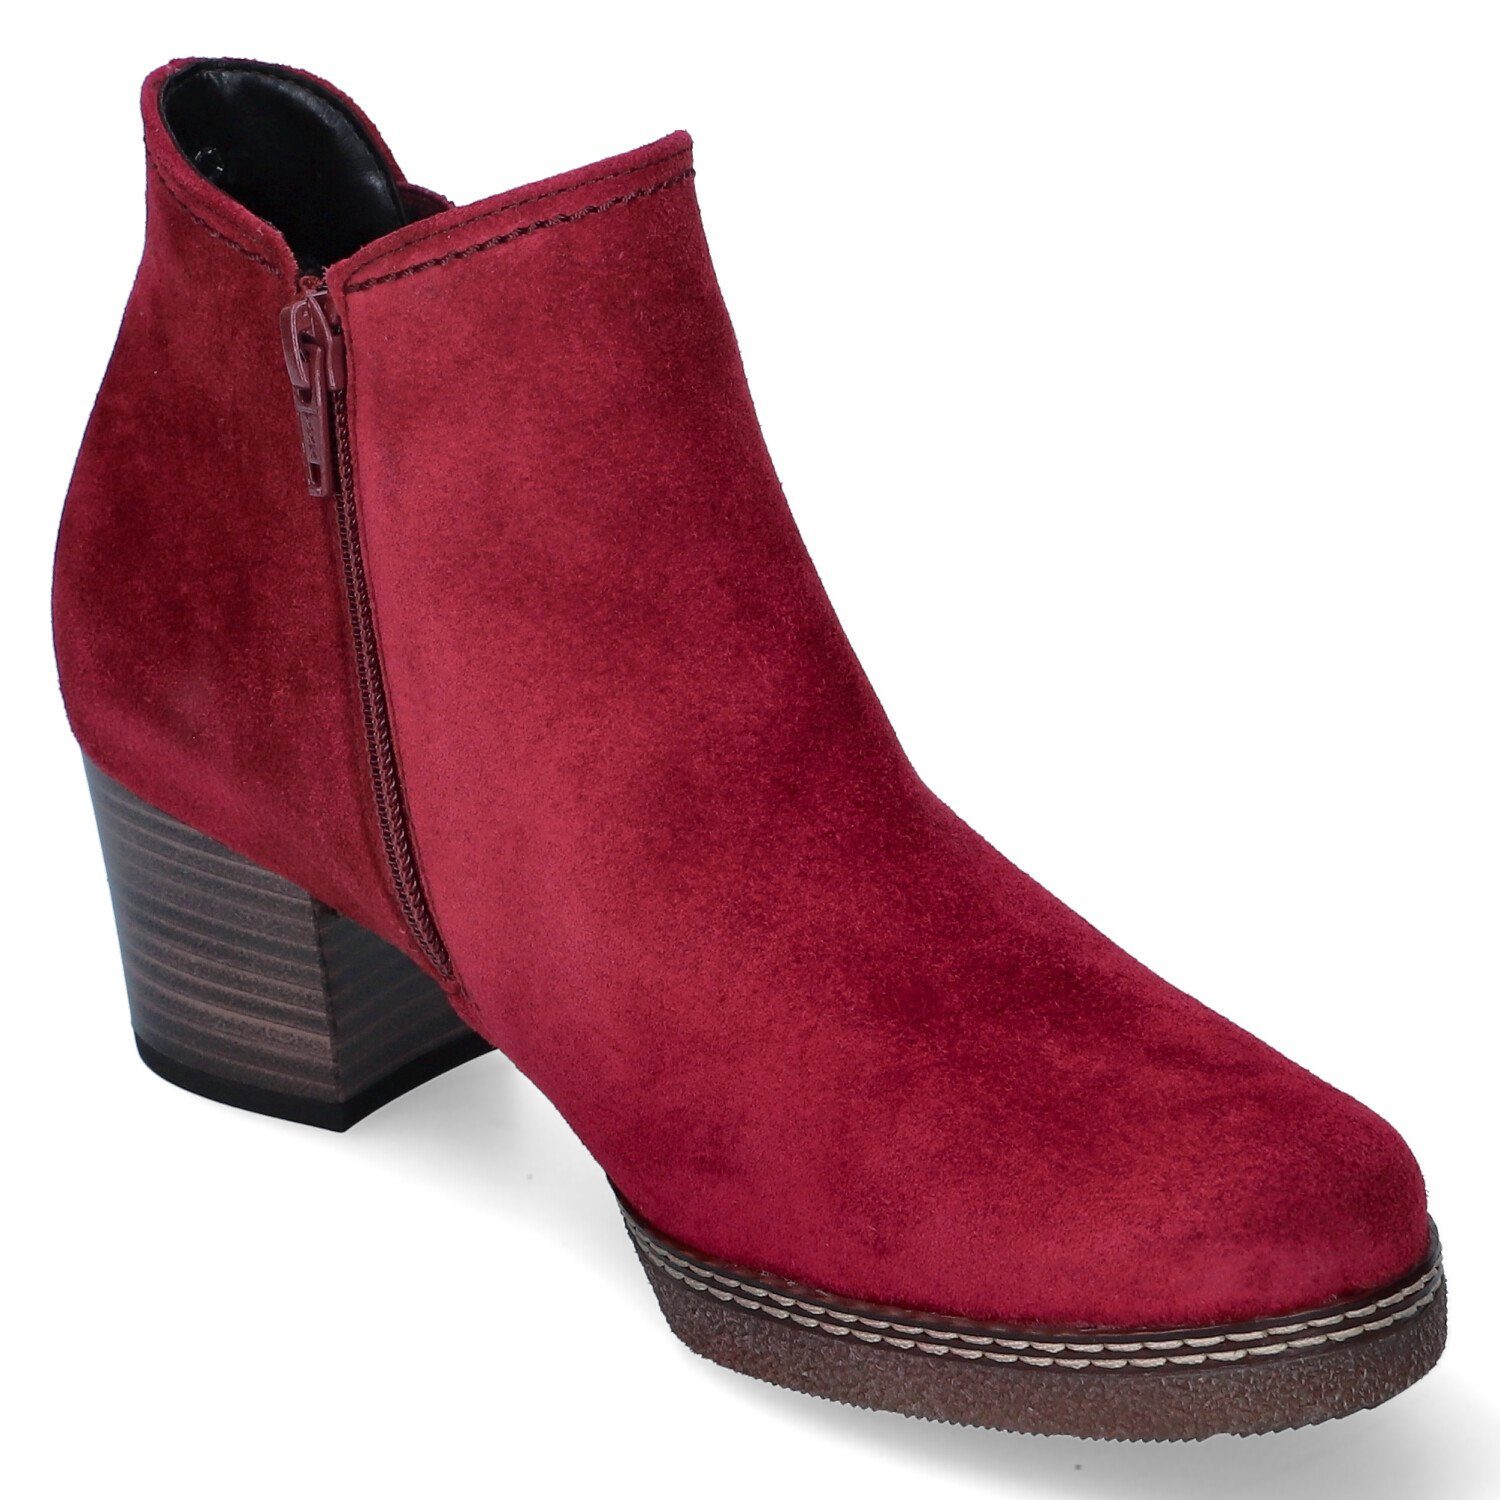 (dark-opera) Boots Ankle Stiefelette Rot Gabor